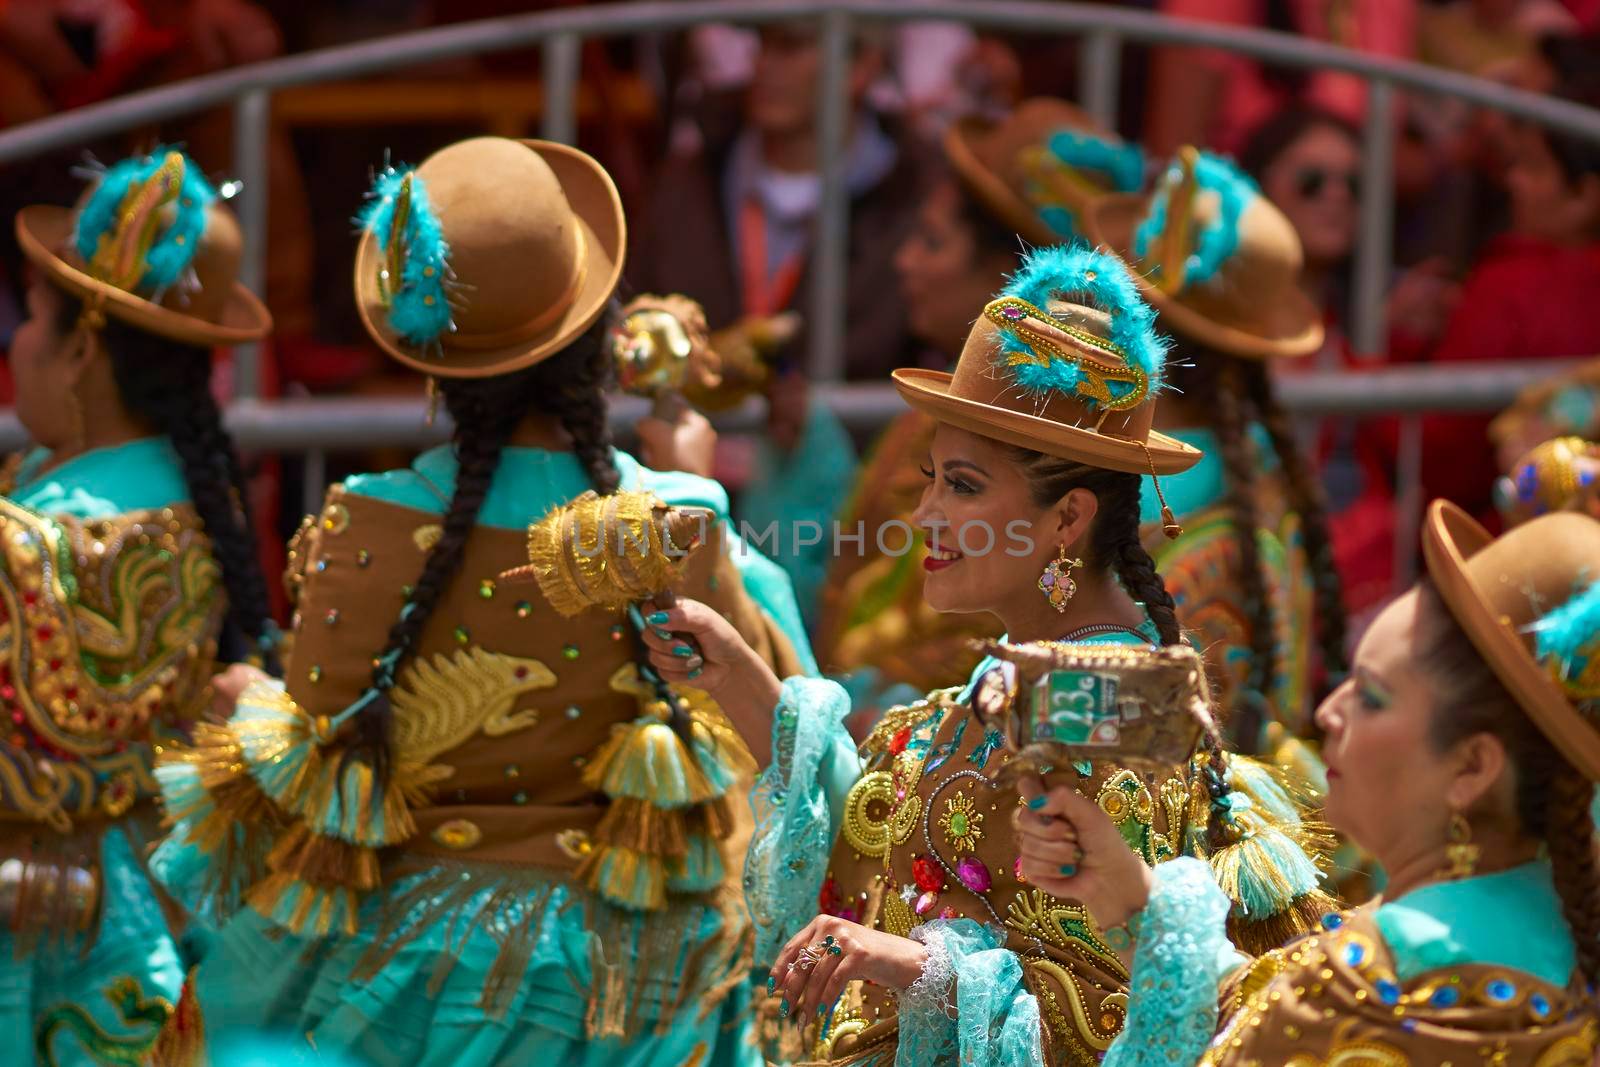 ORURO, BOLIVIA - FEBRUARY 25, 2017: Traditional Bolivian dancer in colourful costume parading through the mining city of Oruro on the Altiplano of Bolivia during the annual Oruro Carnival.